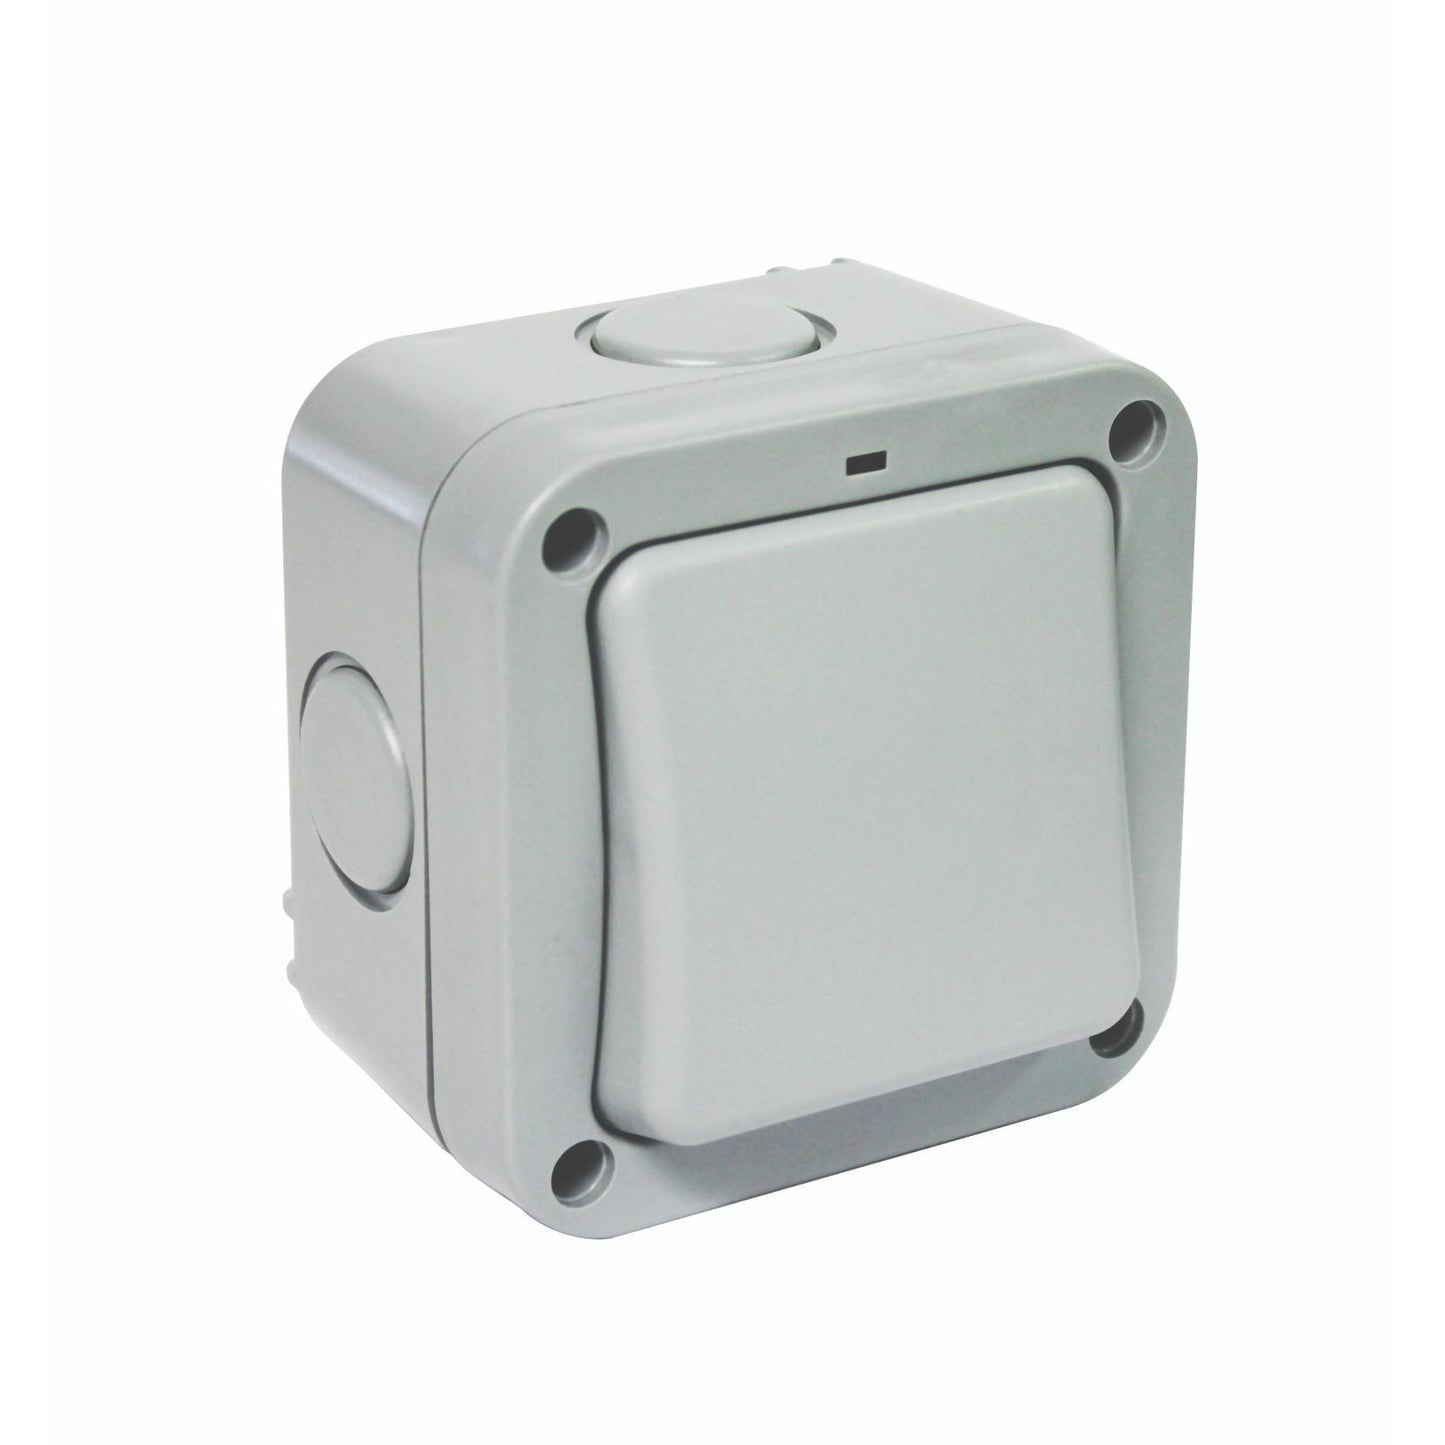 IP66 SINGLE 2-WAY OUTDOOR SWITCH